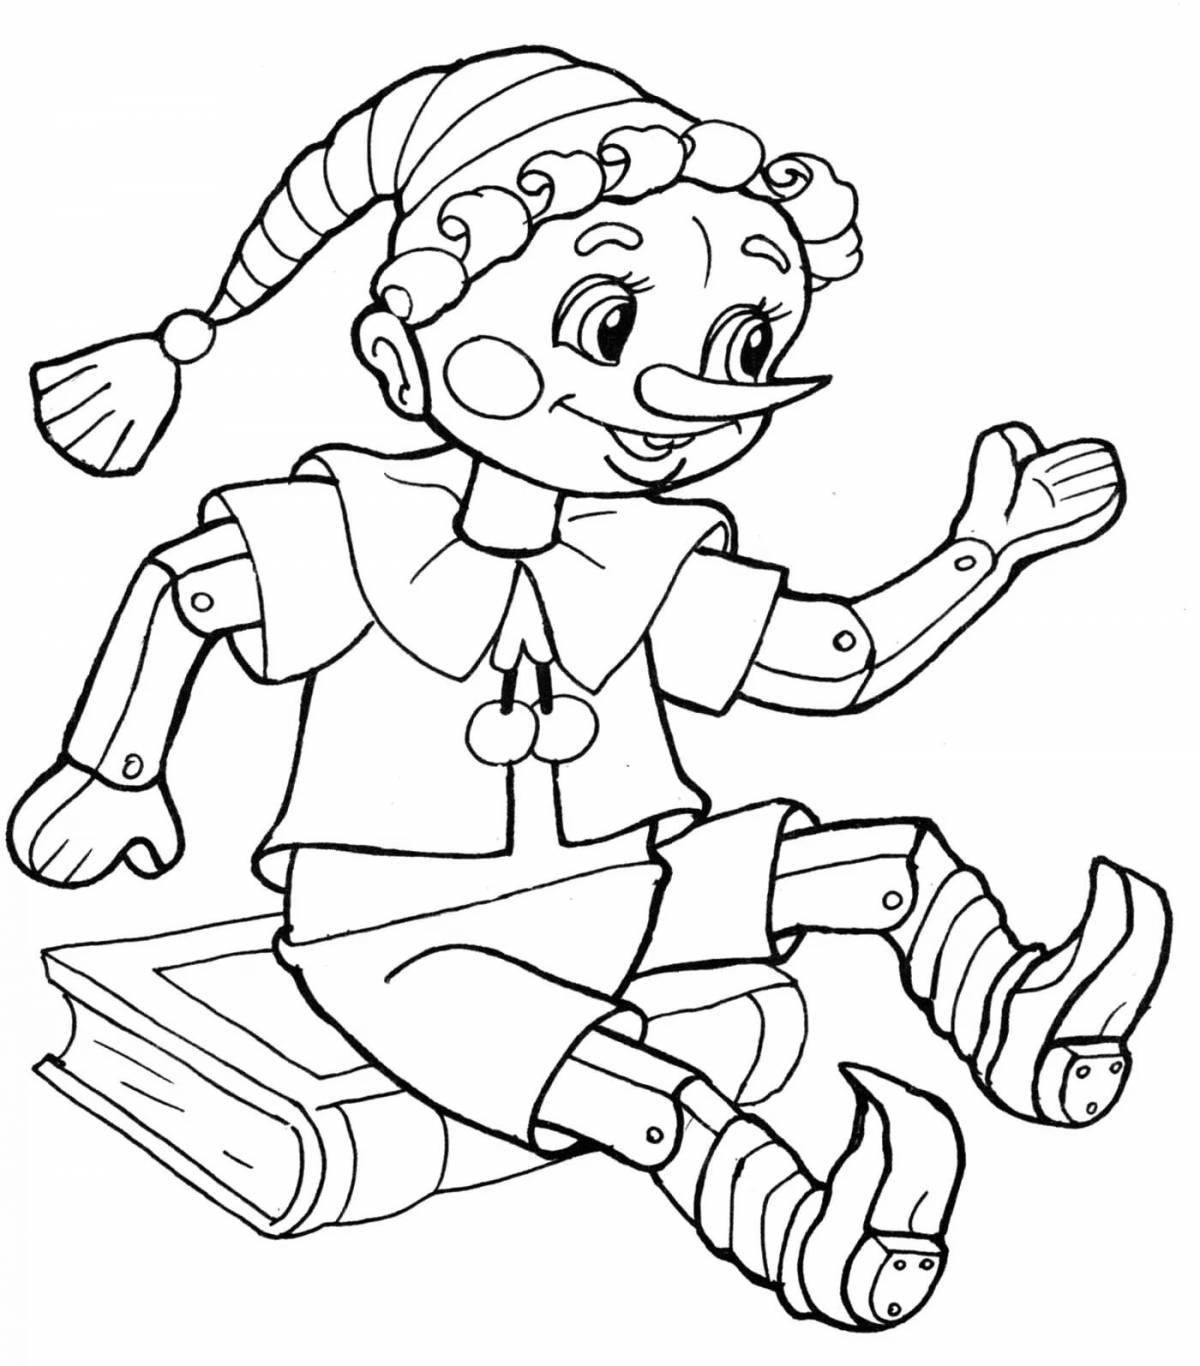 Glorious fairy tale characters coloring book for kids